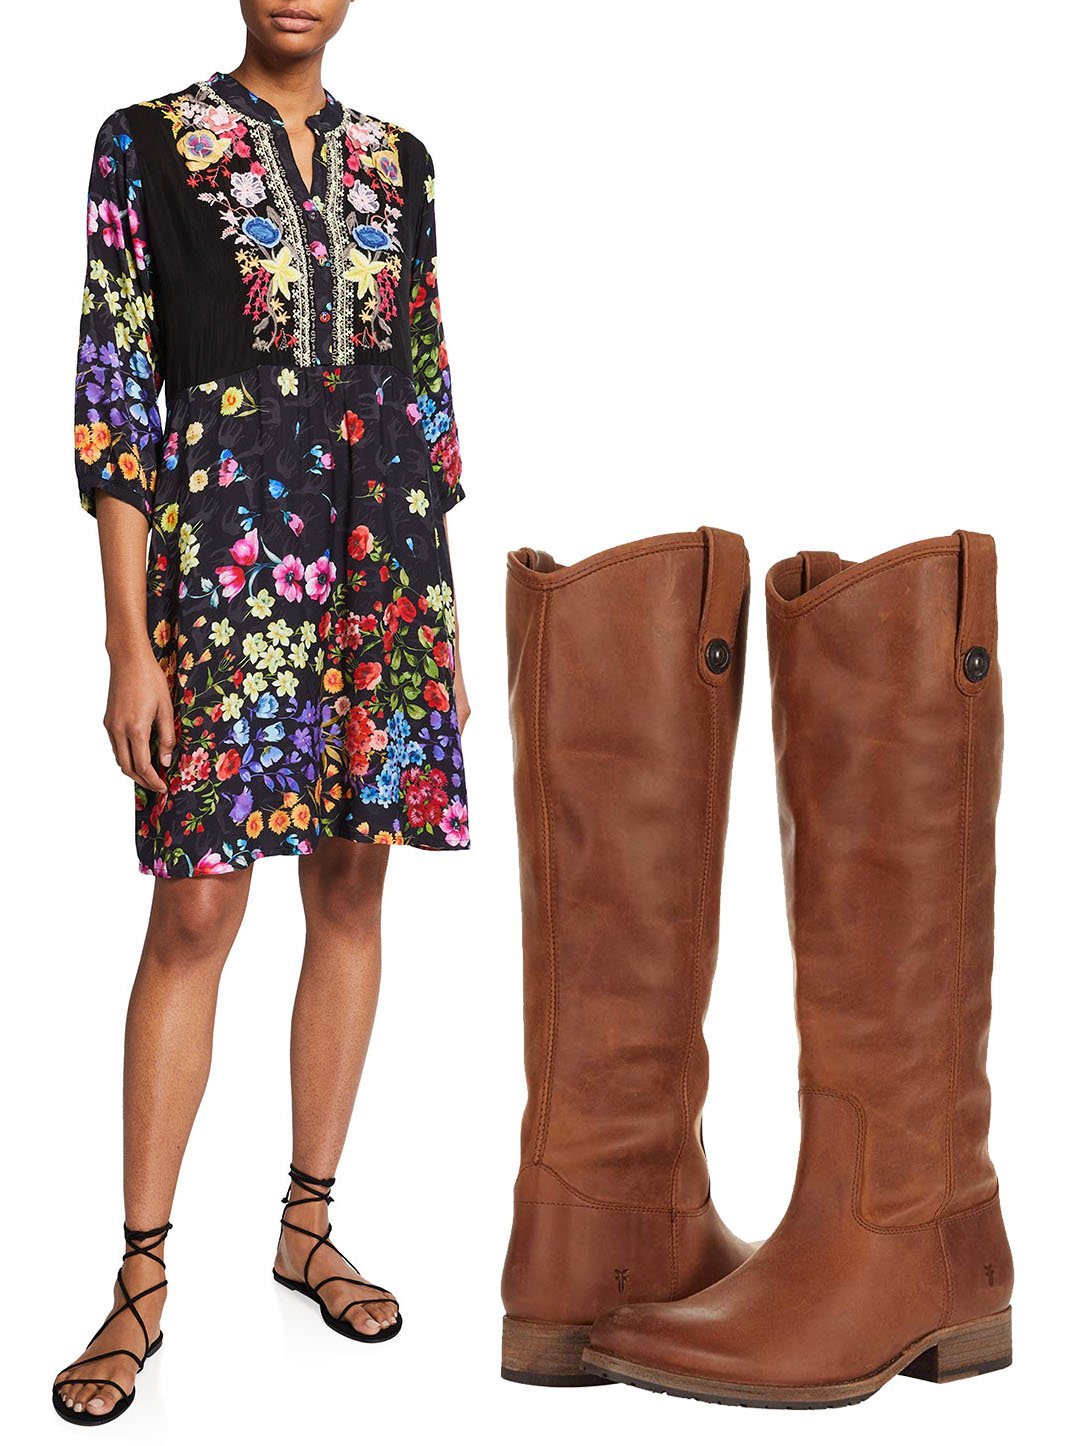 Bohemian Charm Meets Rugged Sophistication: The Johnny Was Ciara floral-print dress with slip is exquisitely paired with the robust Frye Melissa button lug boots